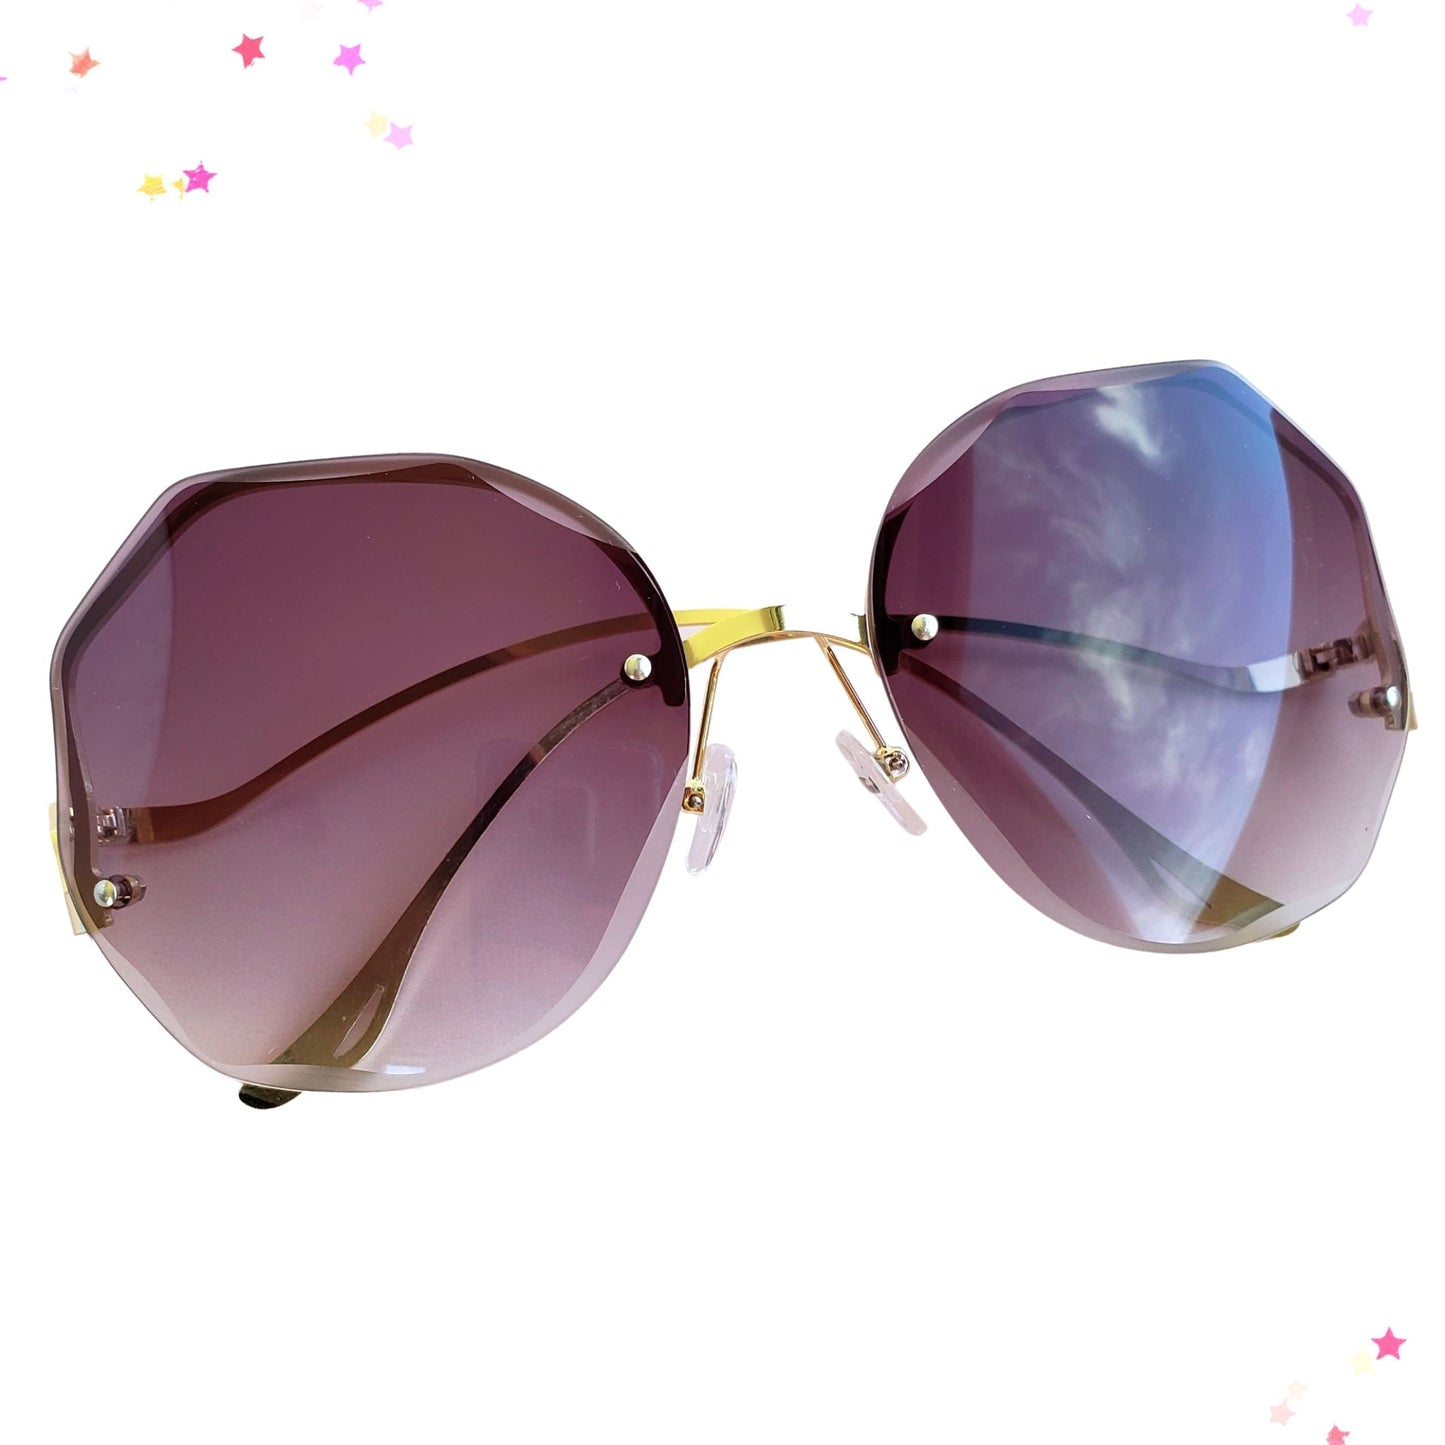 Iconic Sunglasses in Smoky Gray from Confetti Kitty, Only 12.99